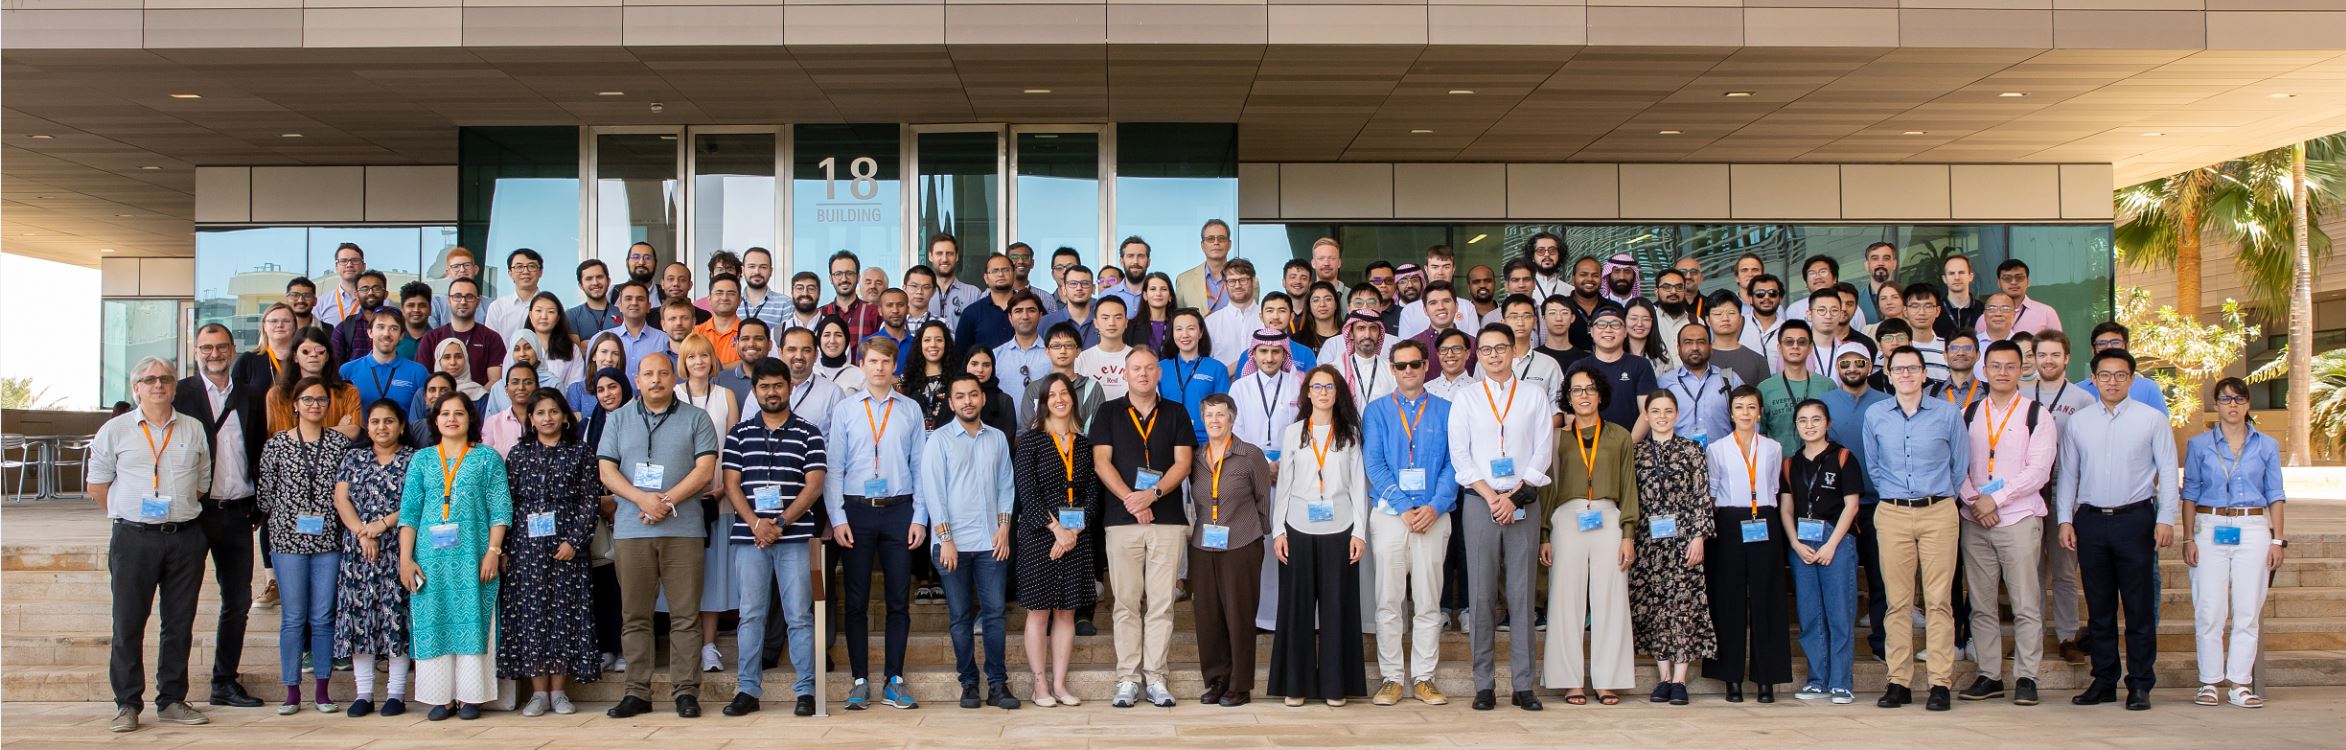 KAUST Research Conference VISION 2030-1